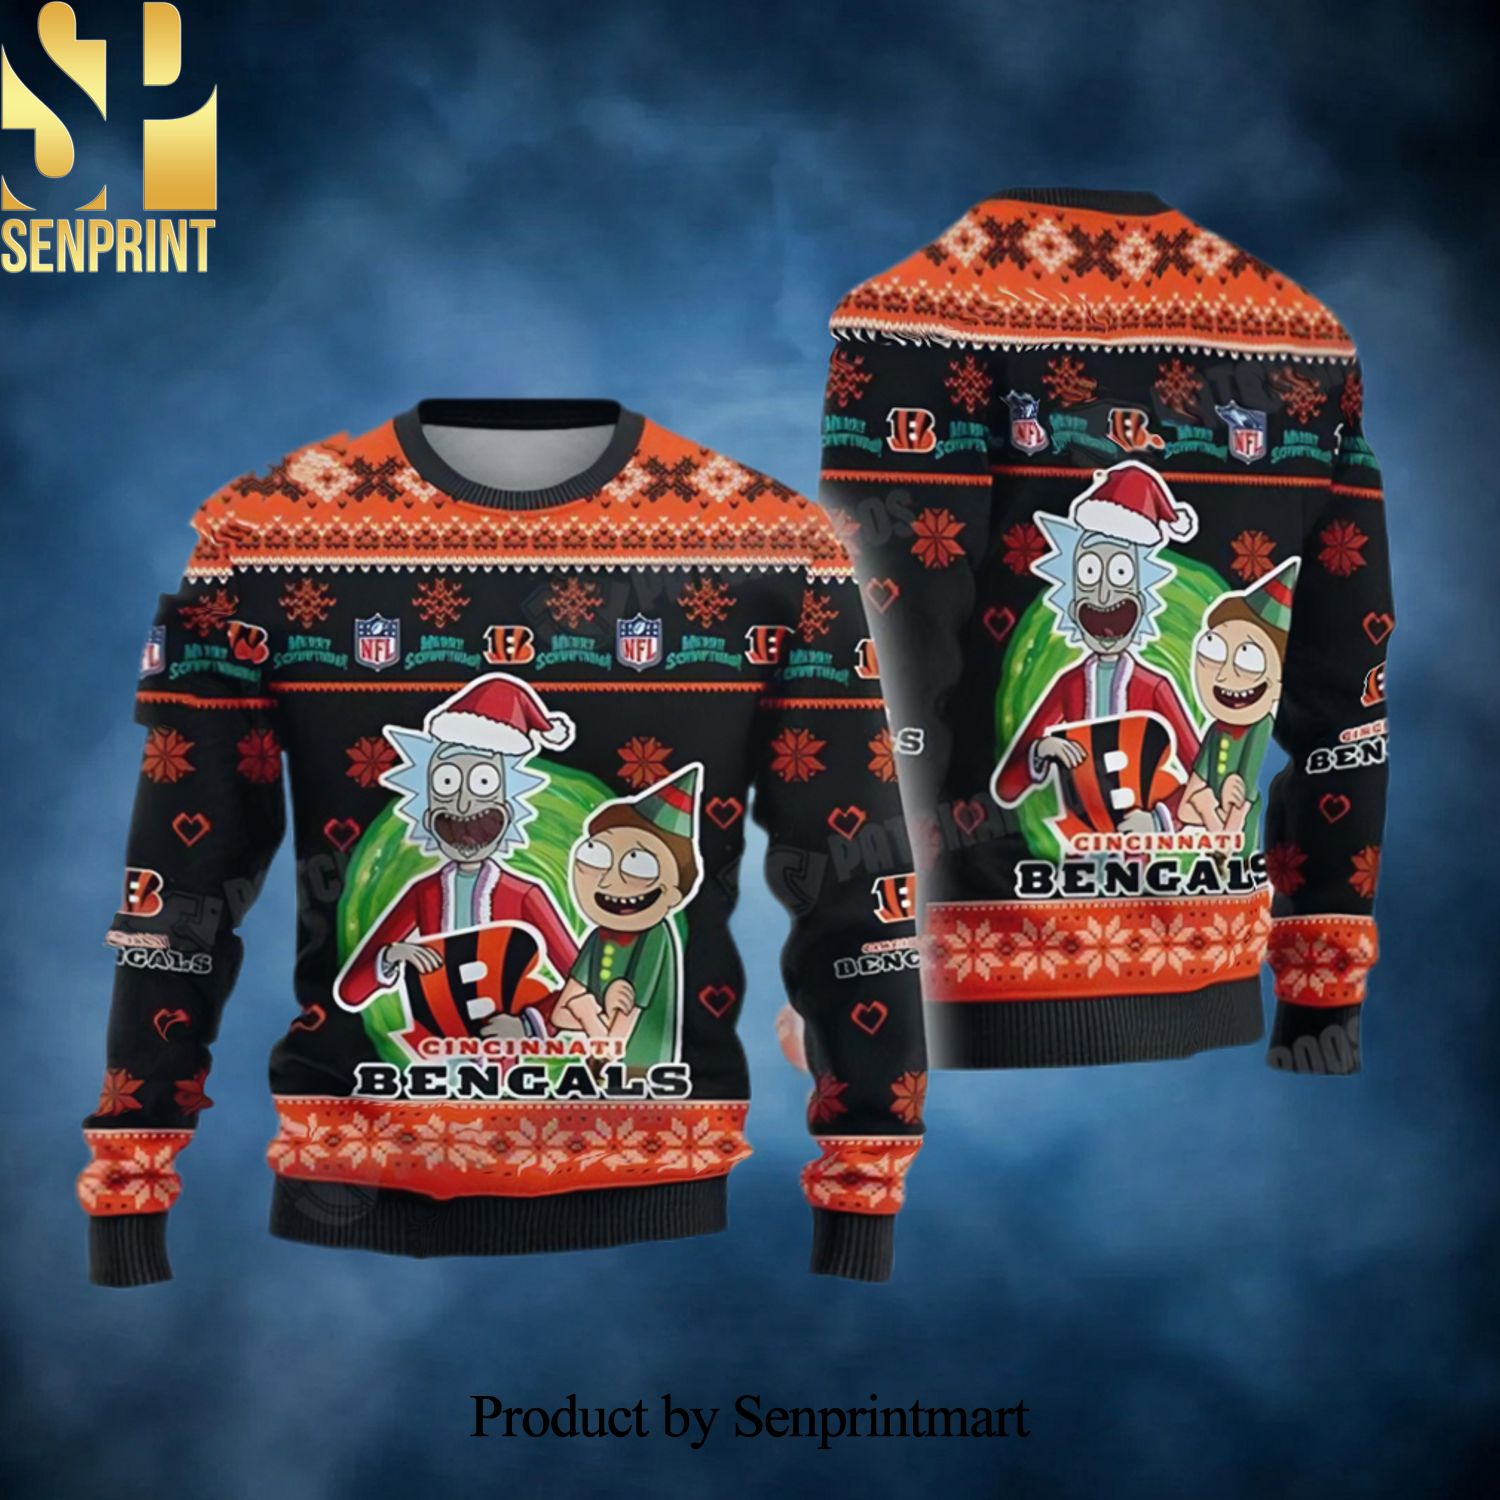 Rick and Morty NFL Cincinnati Football Bengals Gifts Christmas Ugly Wool Knitted Sweater